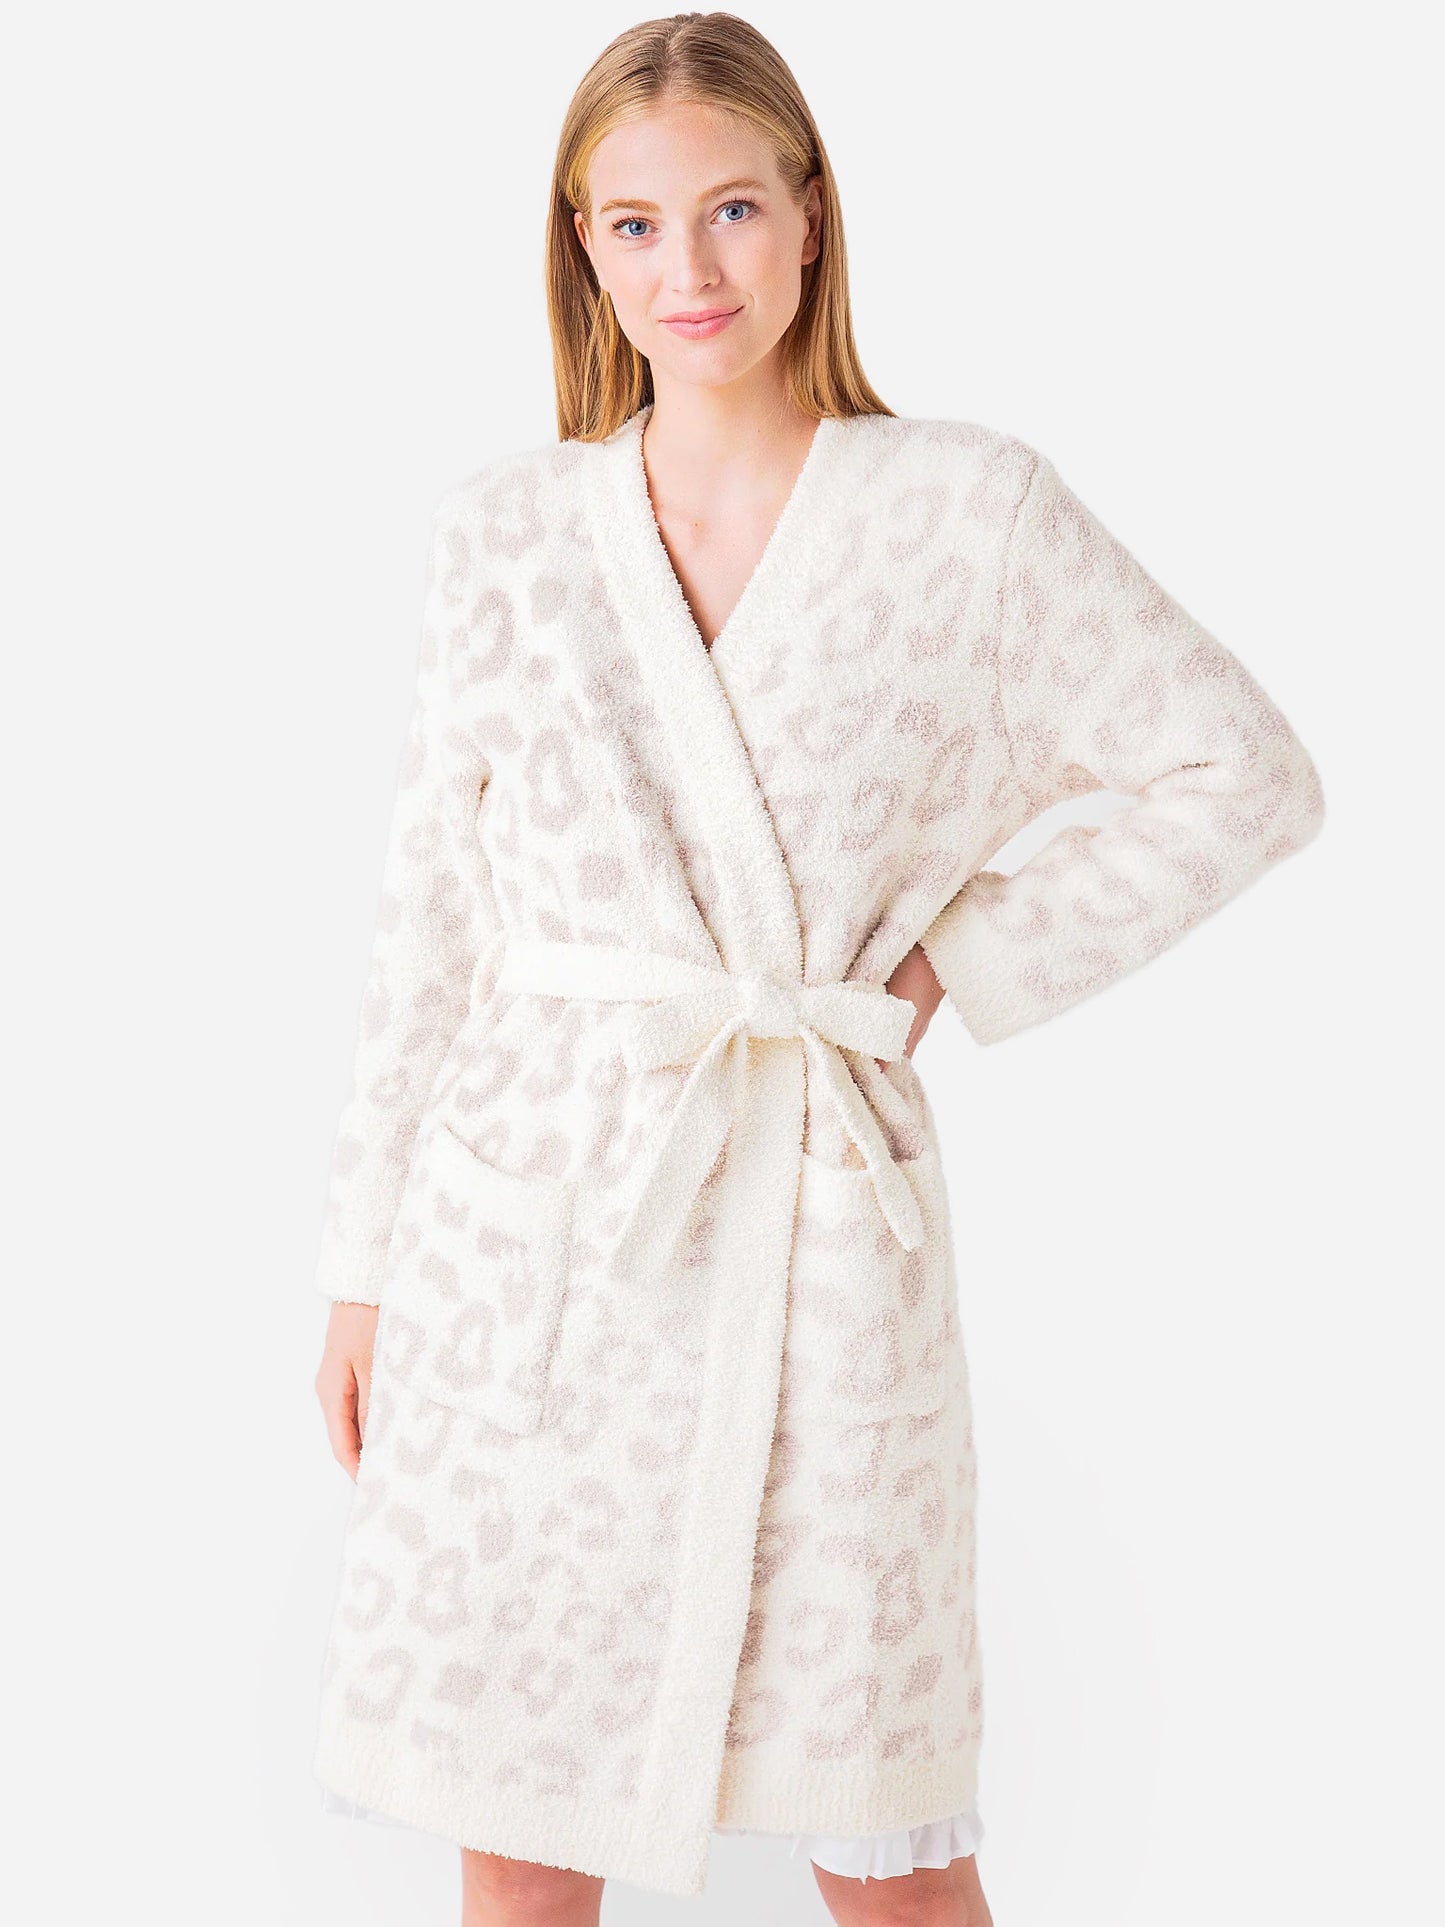 Barefoot Dreams Women's CozyChic® Barefoot In The Wild™ Robe